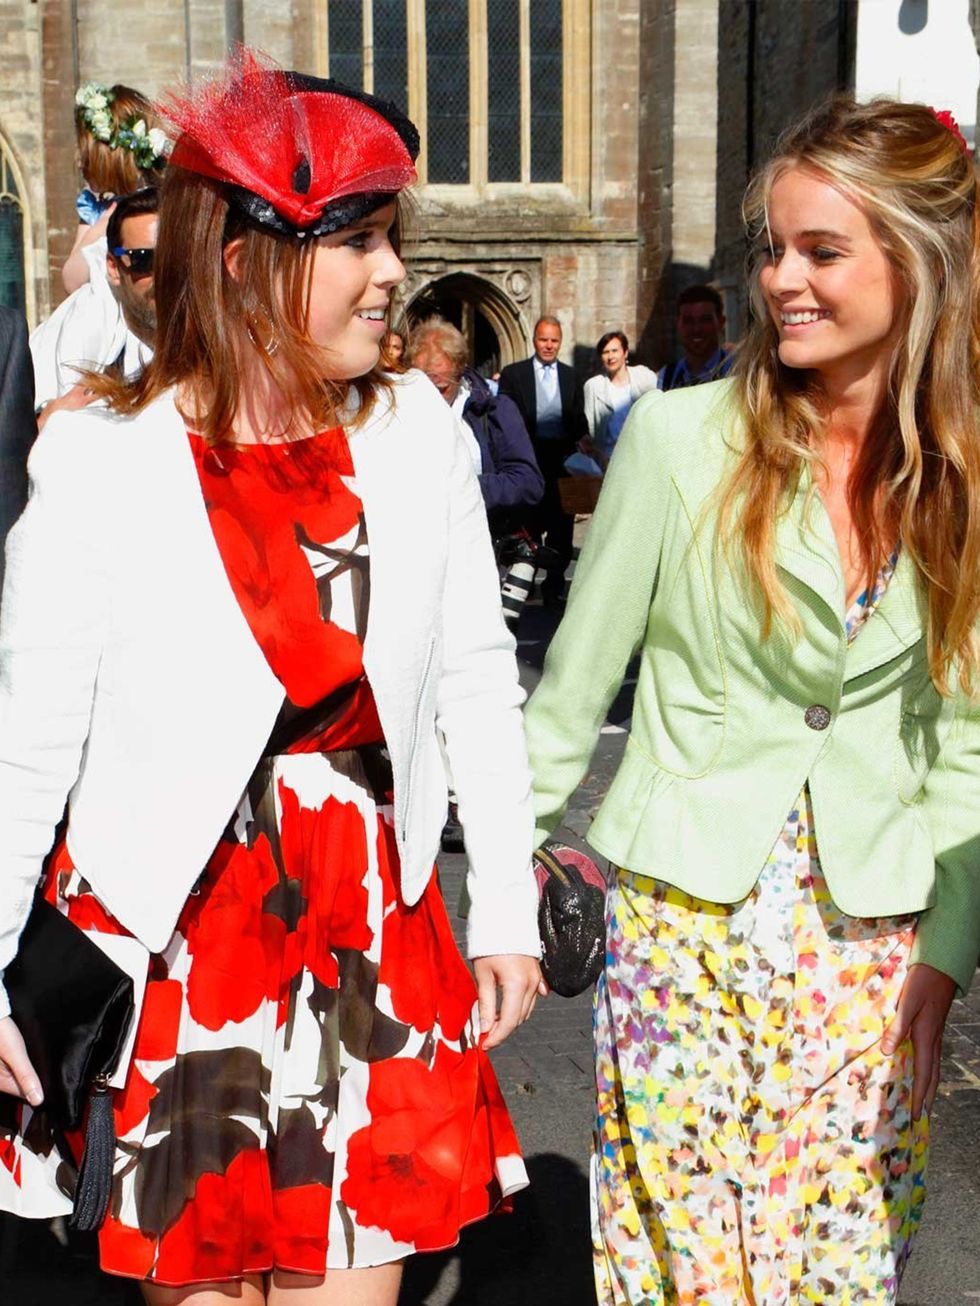 <p>Cressida Bonas wears a floral maxi dress and lime green jacket as she accompanies Princess Eugenie to the wedding of Lady Natasha Rufus Isaacs and Rupert Finch, June 2013.</p><p><em><a href="http://www.elleuk.com/star-style/celebrity-style-files">More 